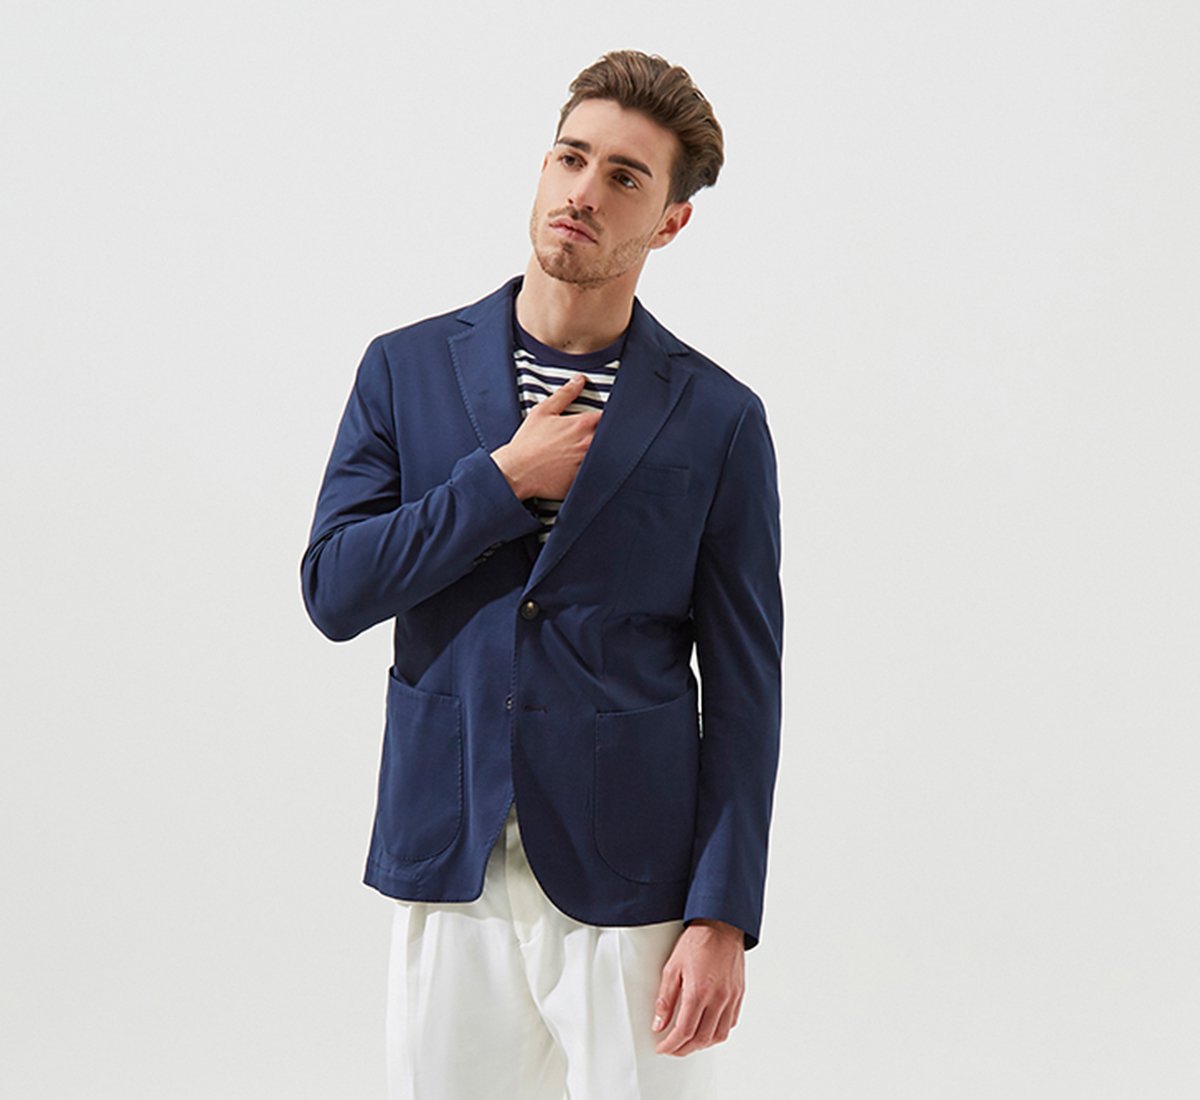 OXFORD BLUE JACKET WITH VISIBLE STITCHING